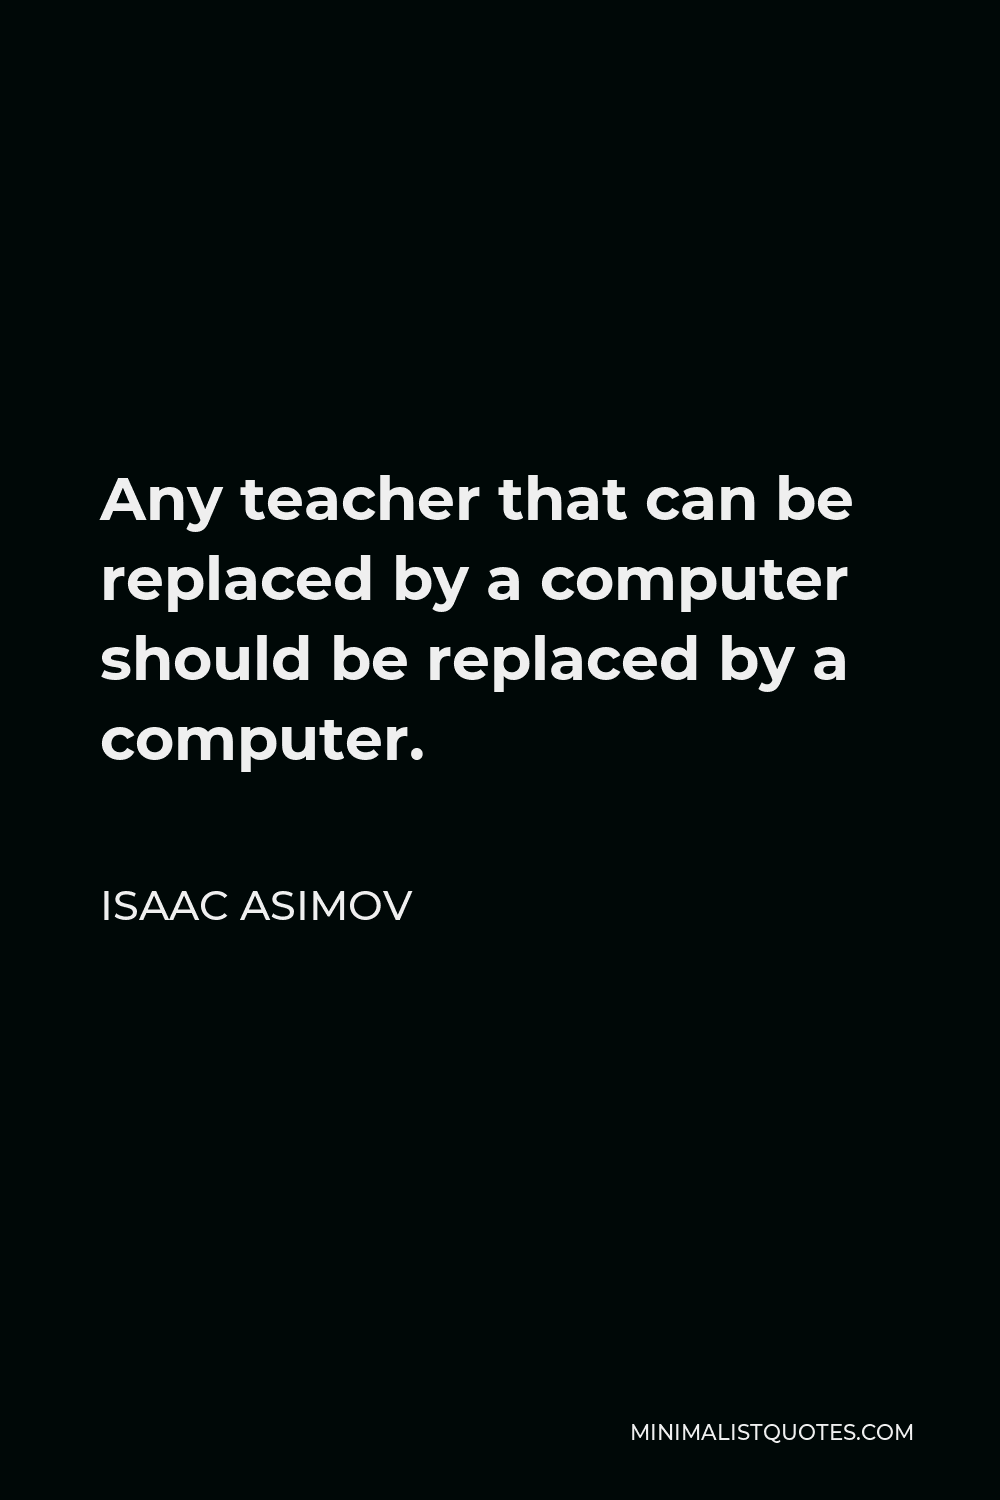 Isaac Asimov Quote - Any teacher that can be replaced by a computer should be replaced by a computer.